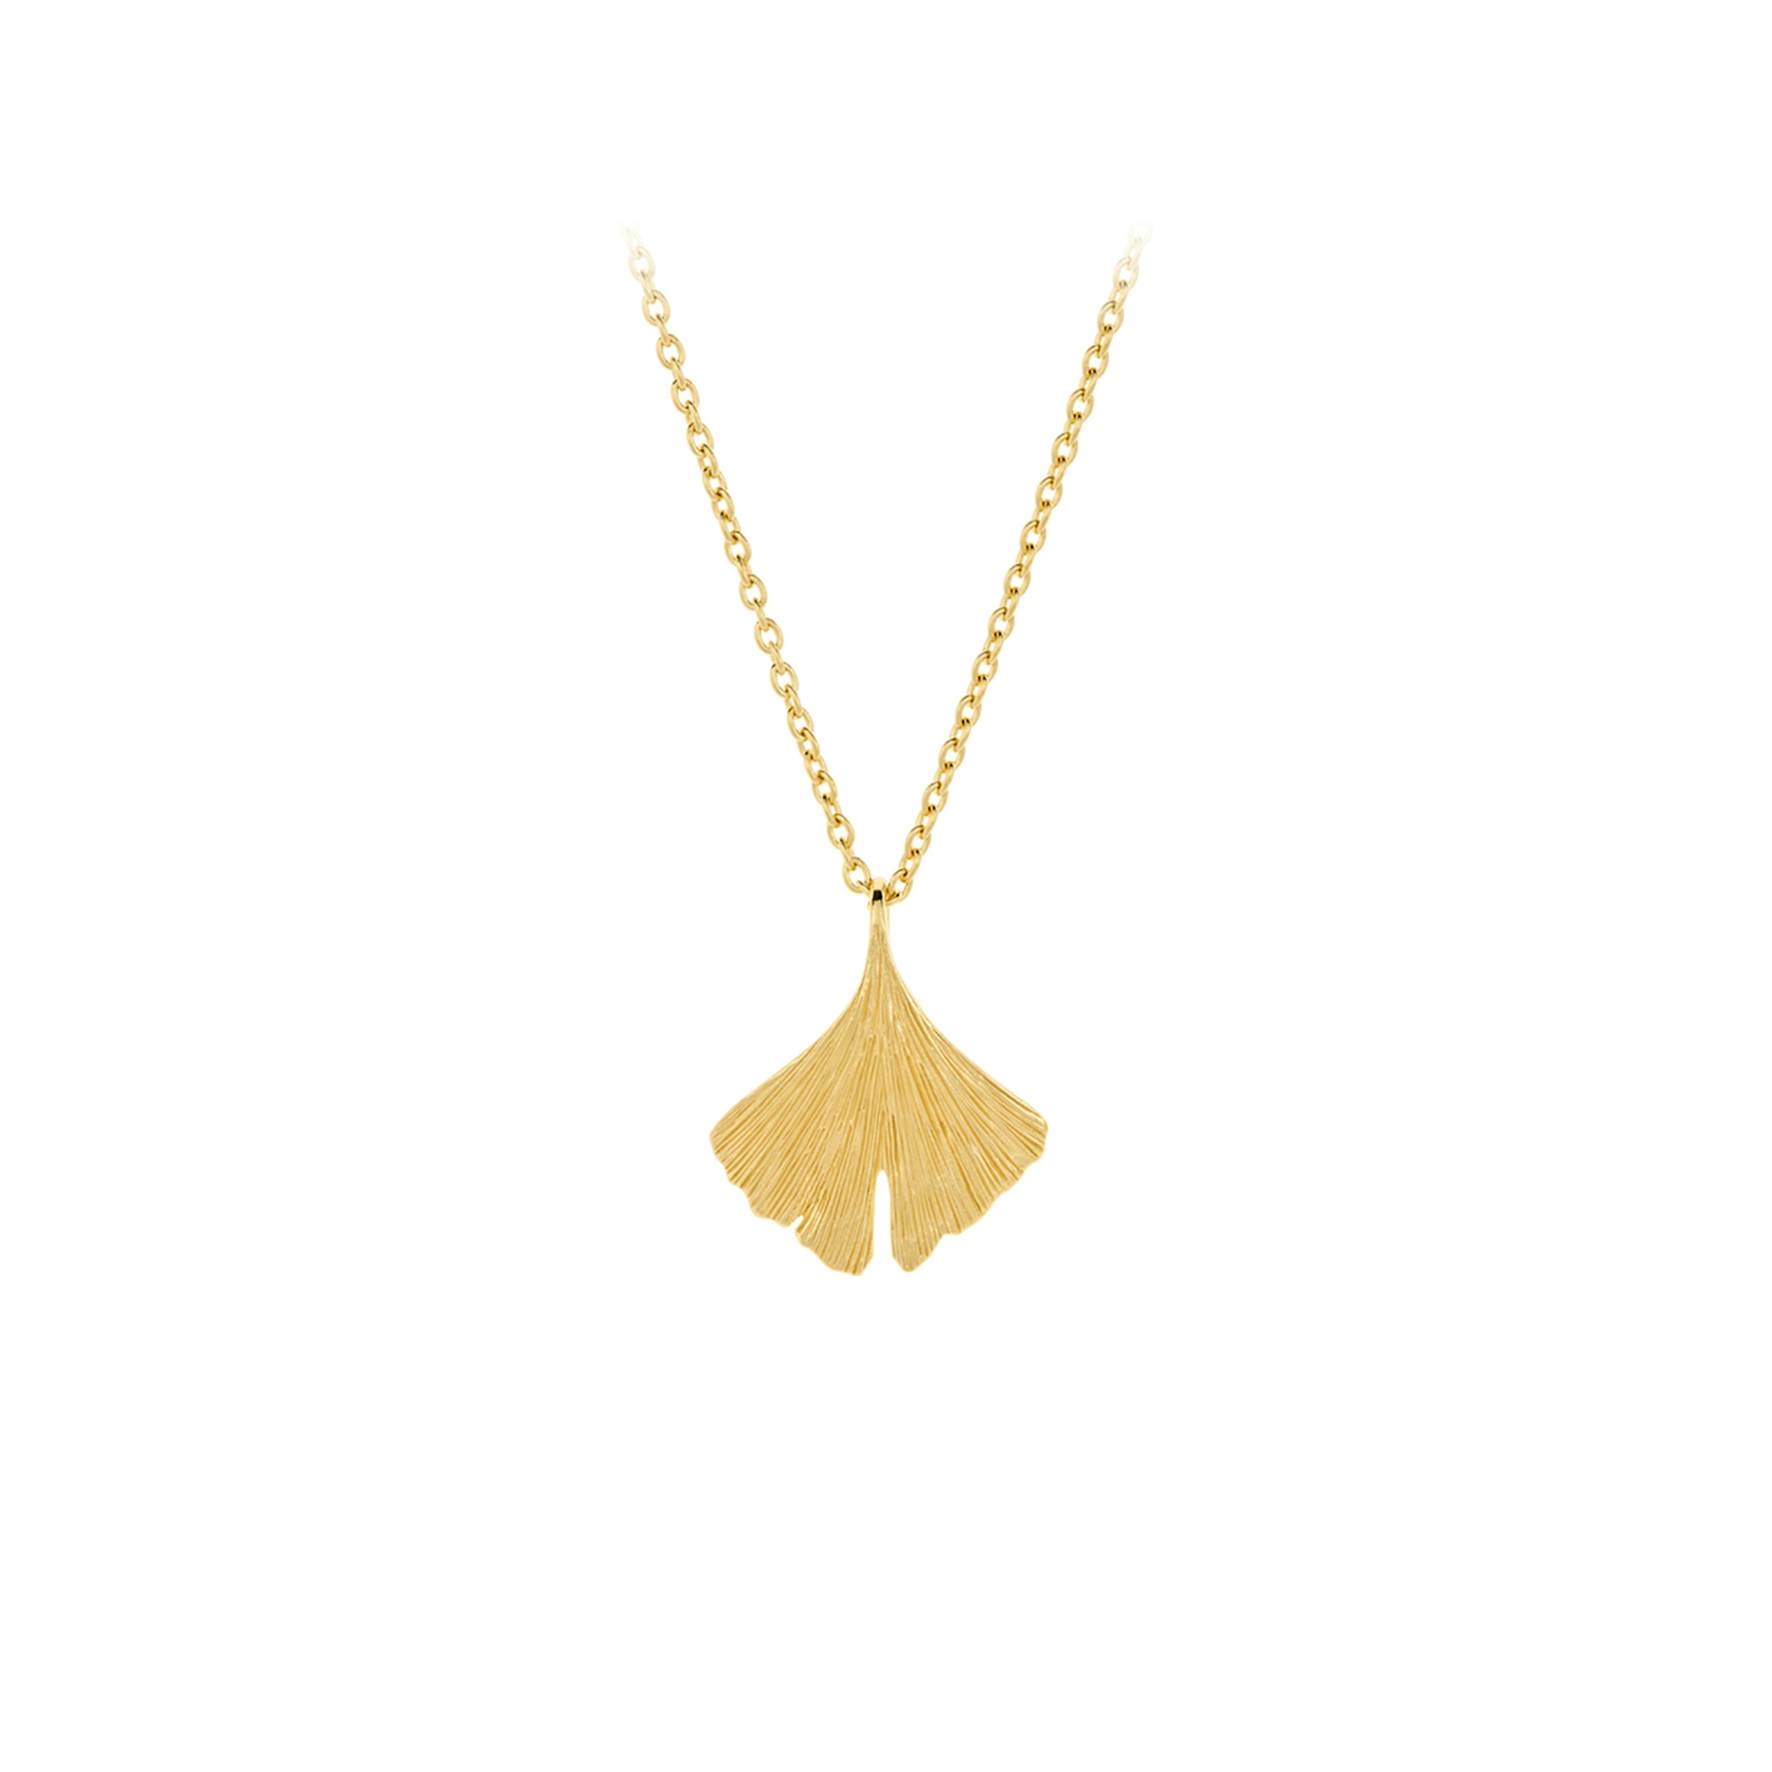 Biloba Necklace from Pernille Corydon in Goldplated-Silver Sterling 925